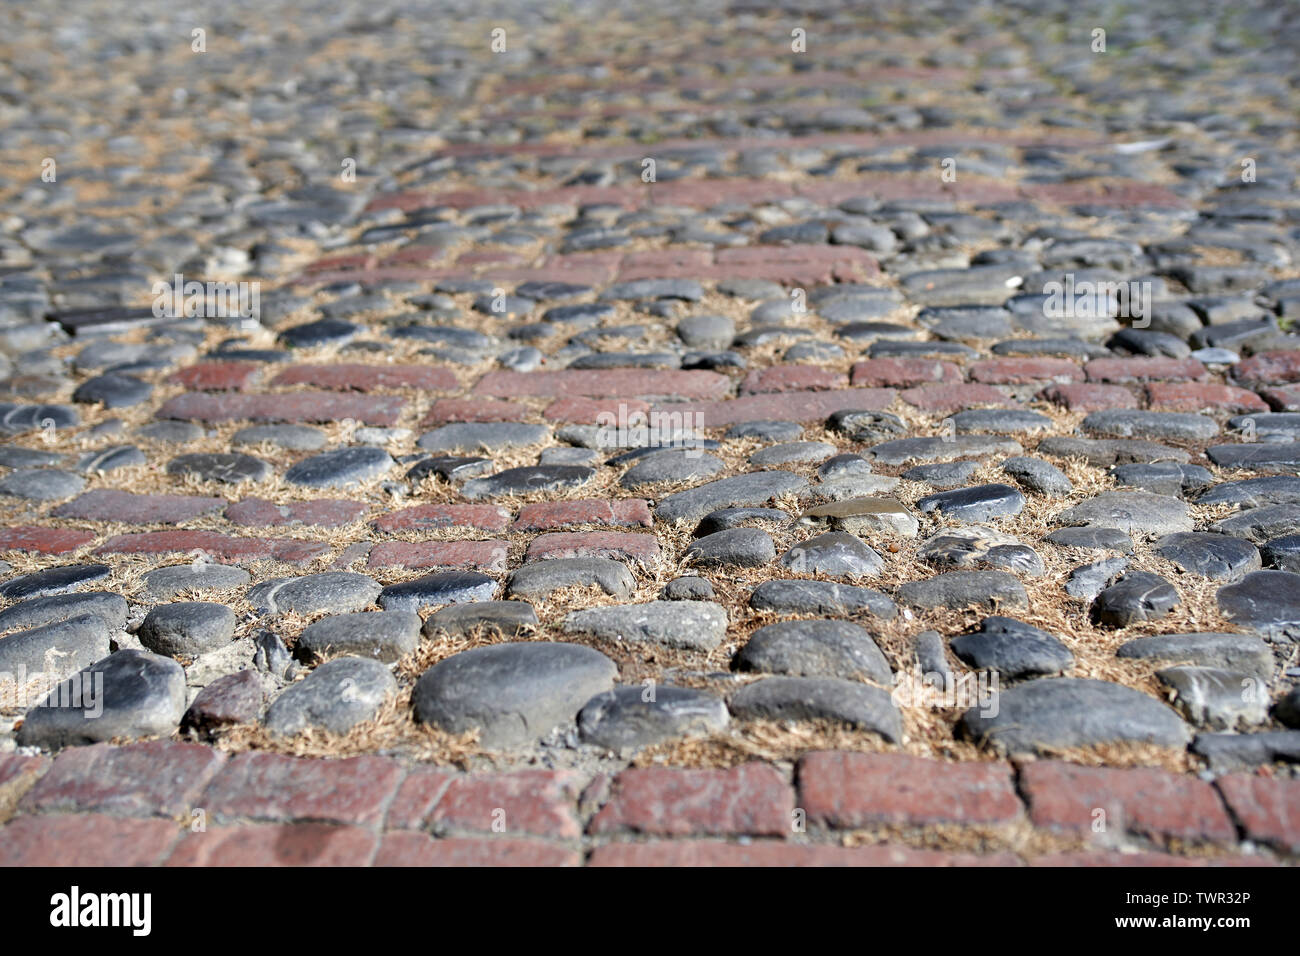 A street paved in stone Stock Photo